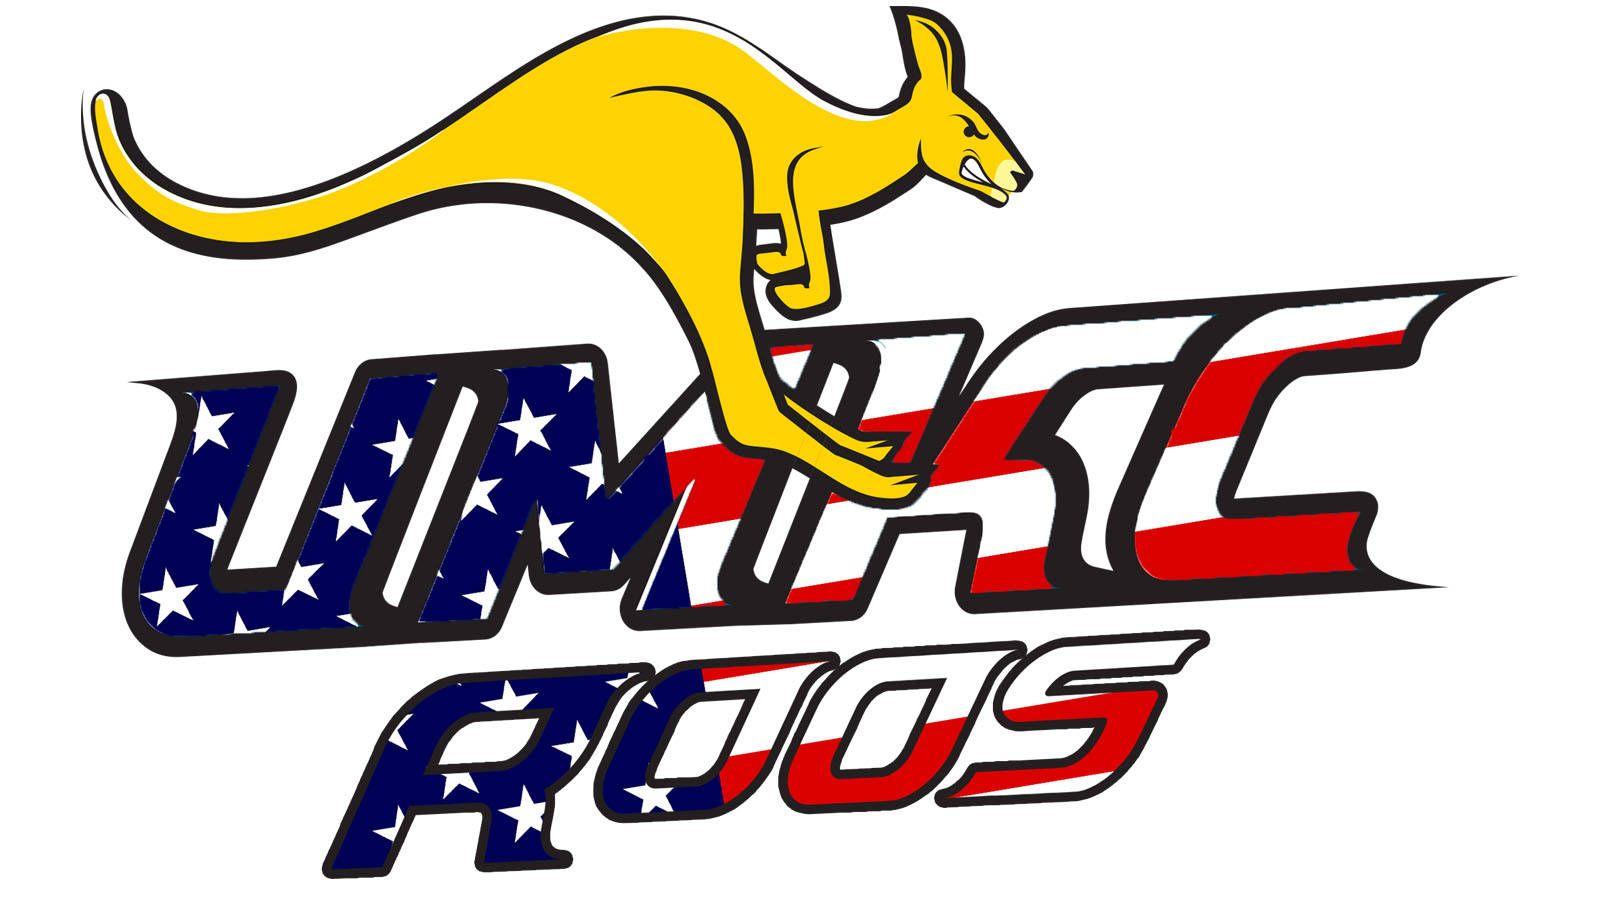 UMKC Kangaroos Logo - Military Appreciation Day Set for December OPERATION: SELL OUT